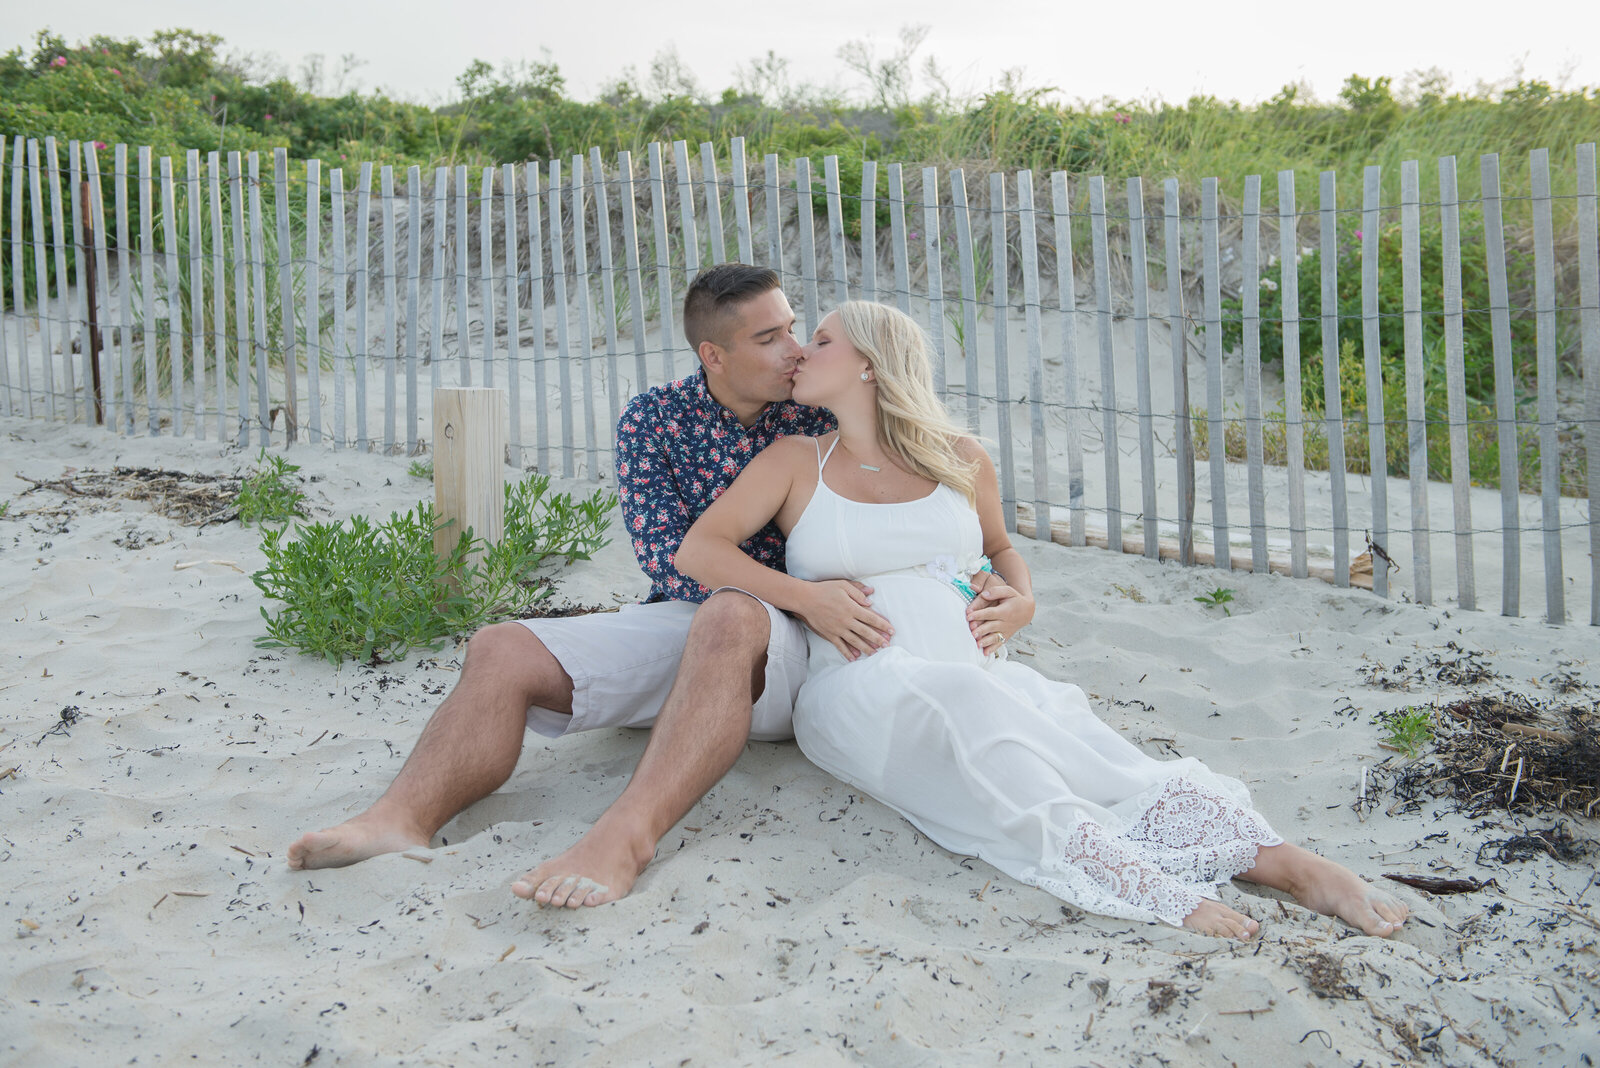 Husband and wife kissing in maternity photo on beach